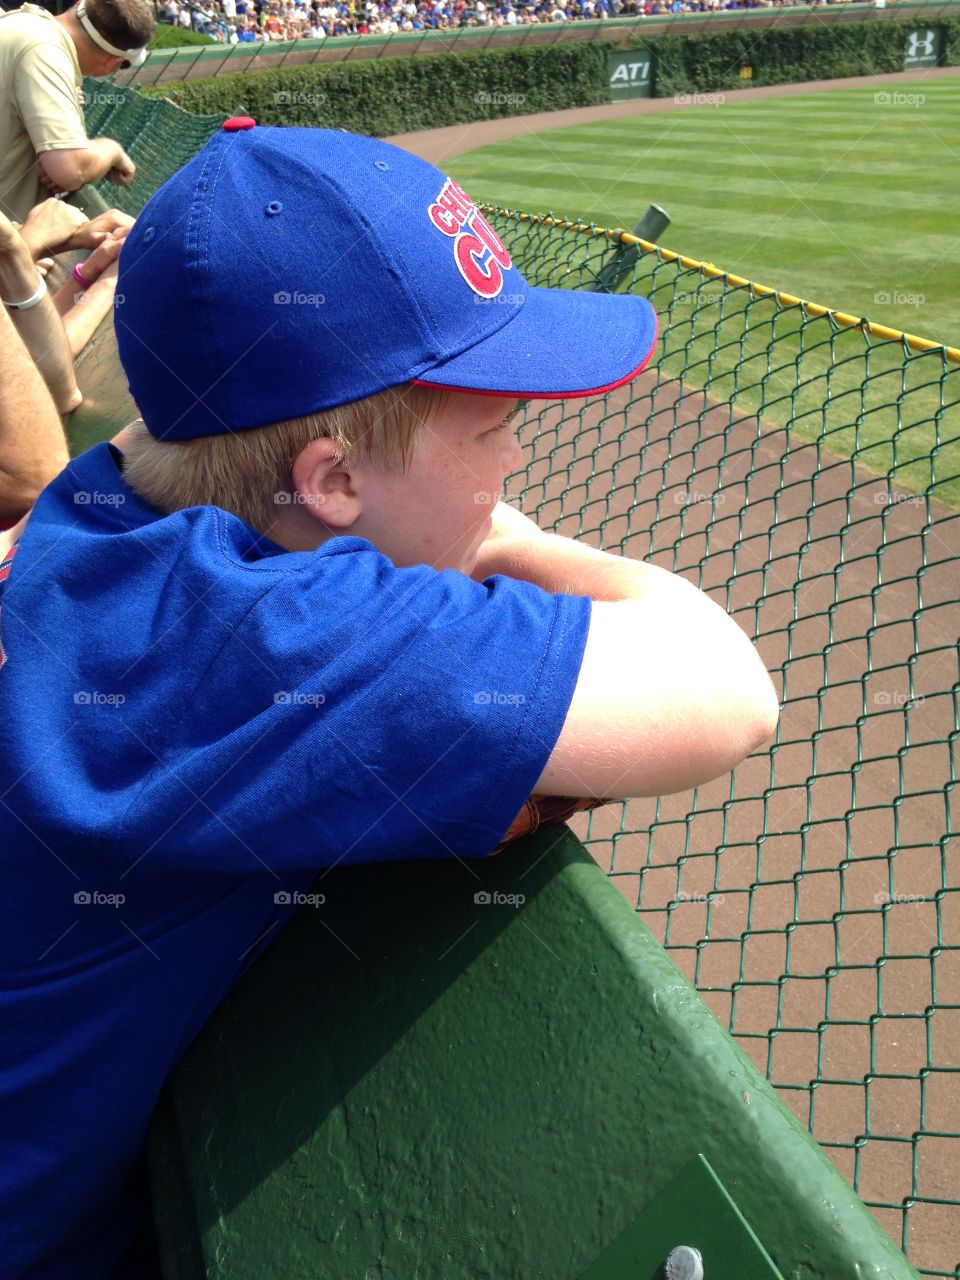 We love baseball . Grandson's first time at Wrigley Field front row in the bleachers waiting for the Cubs to take the field